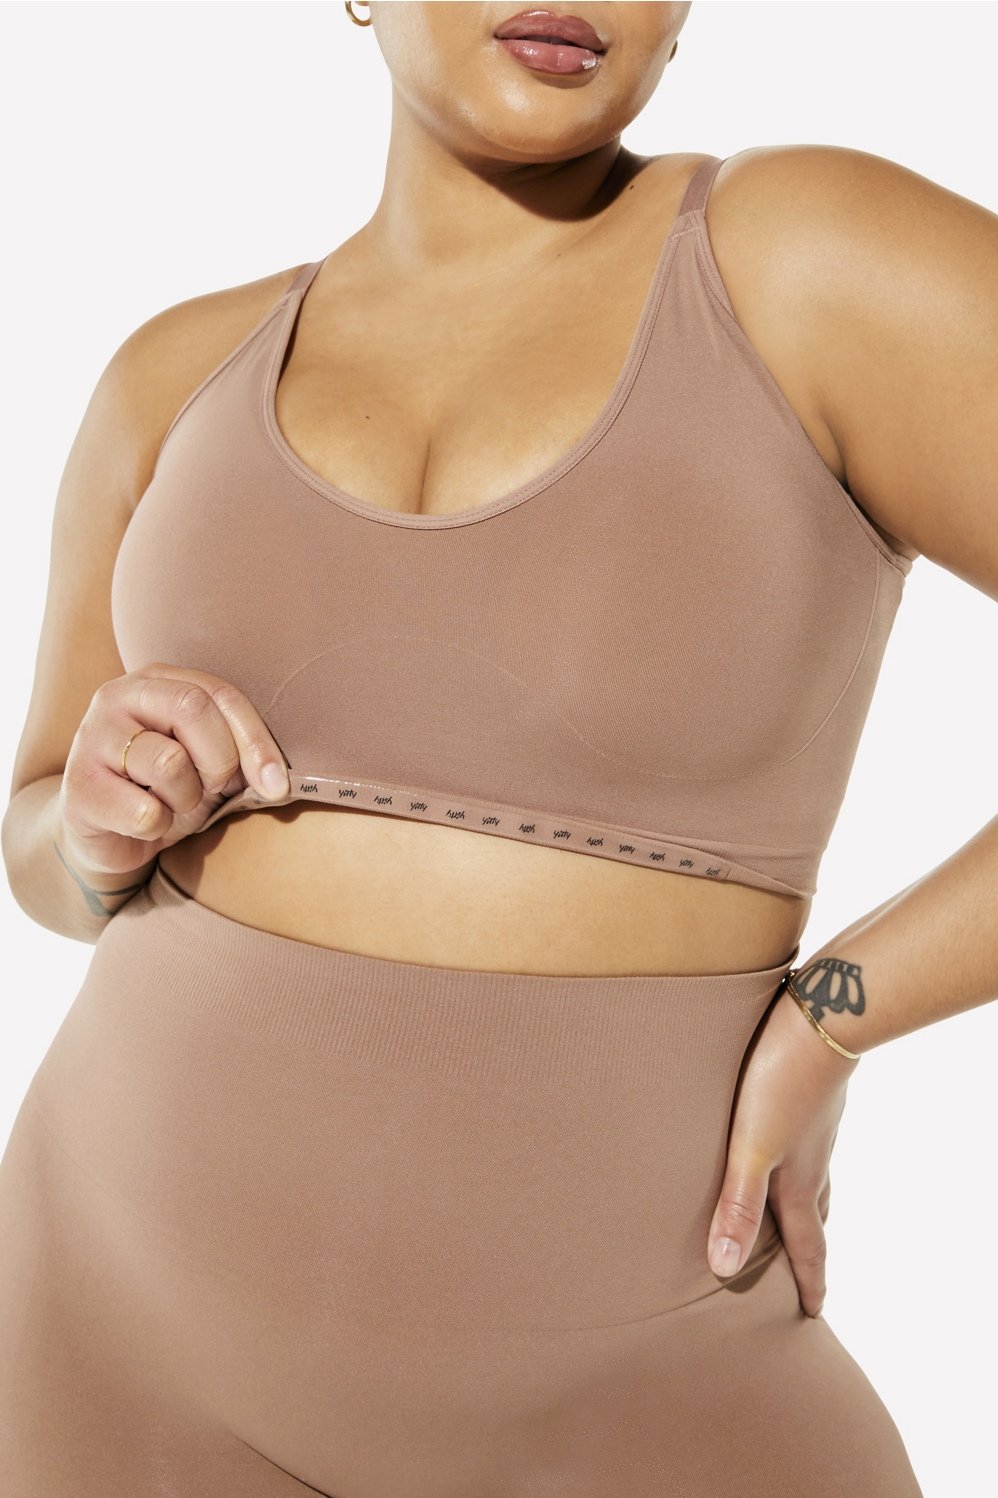 Nearly Naked Shaping Plunge Bra Fabletics